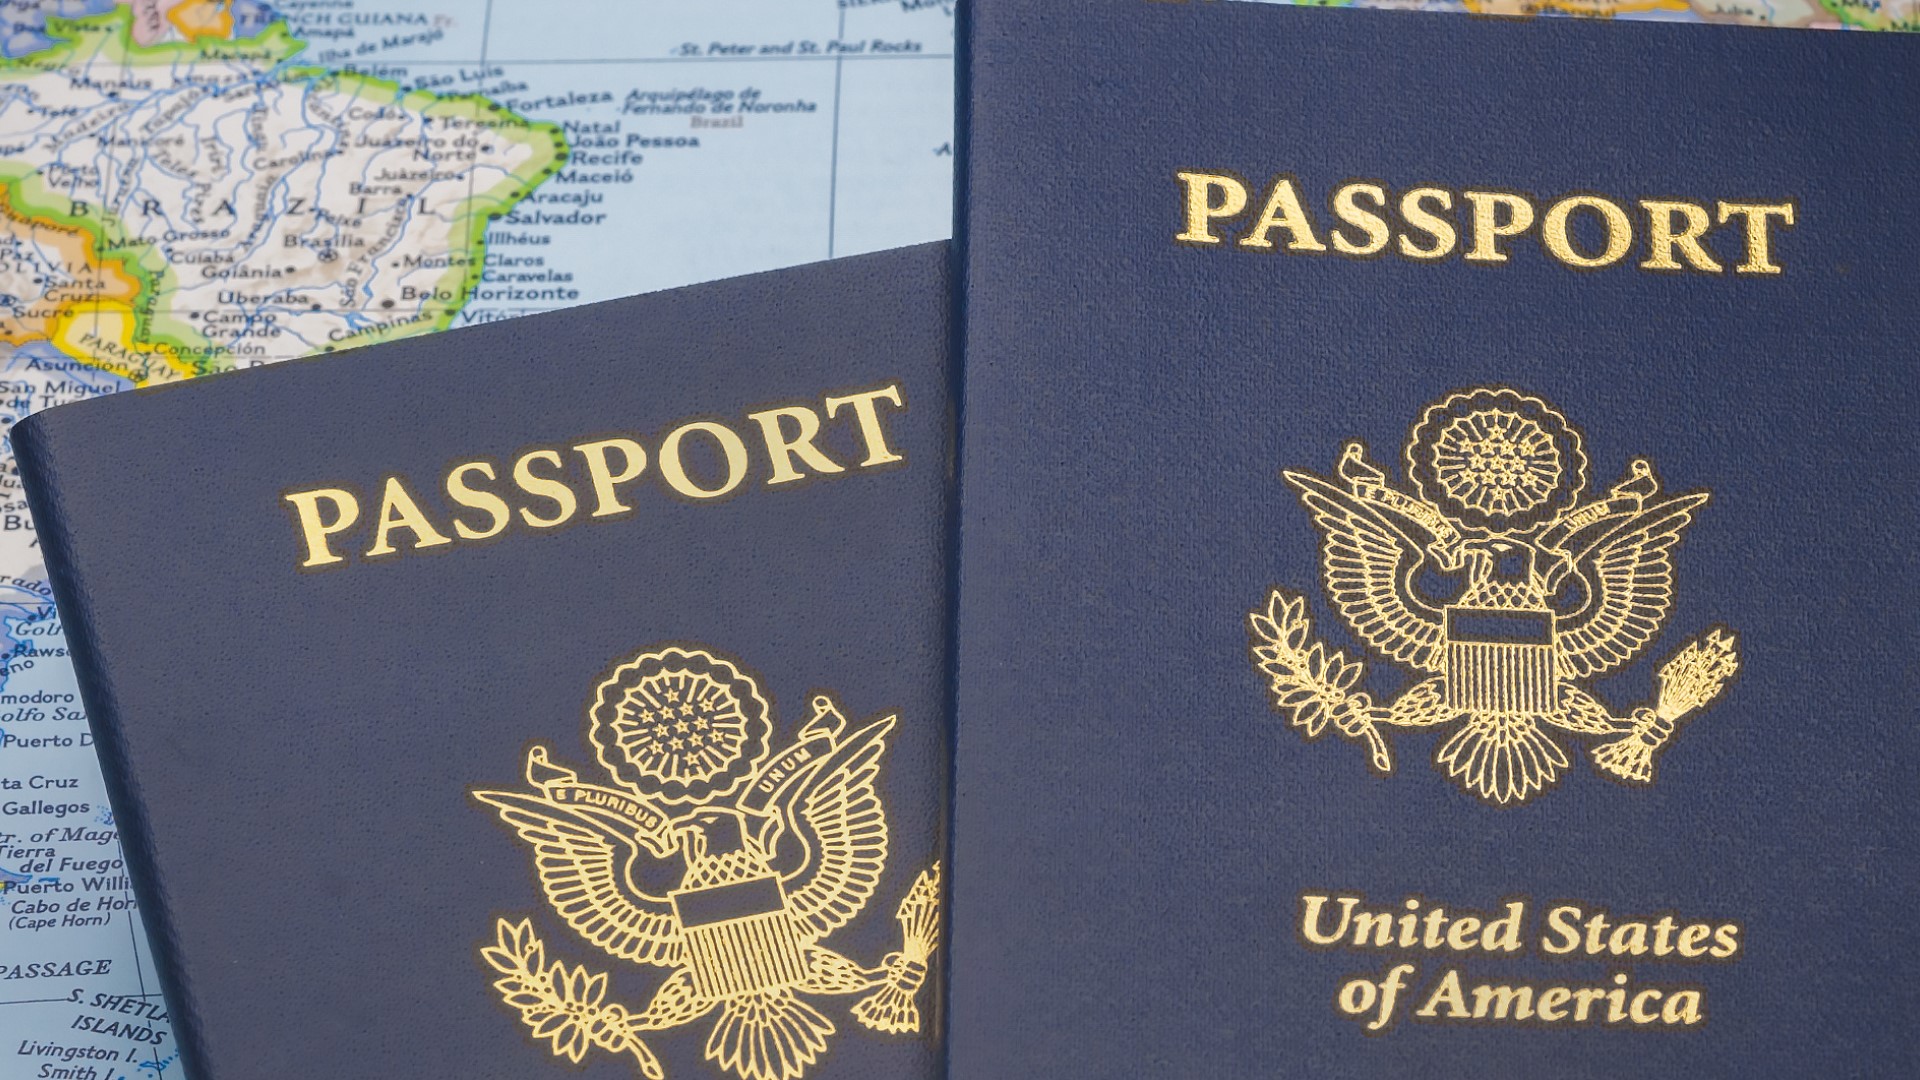 Passport Scams On The Rise As Millions Of Americans Apply For Renewed Or New Passports